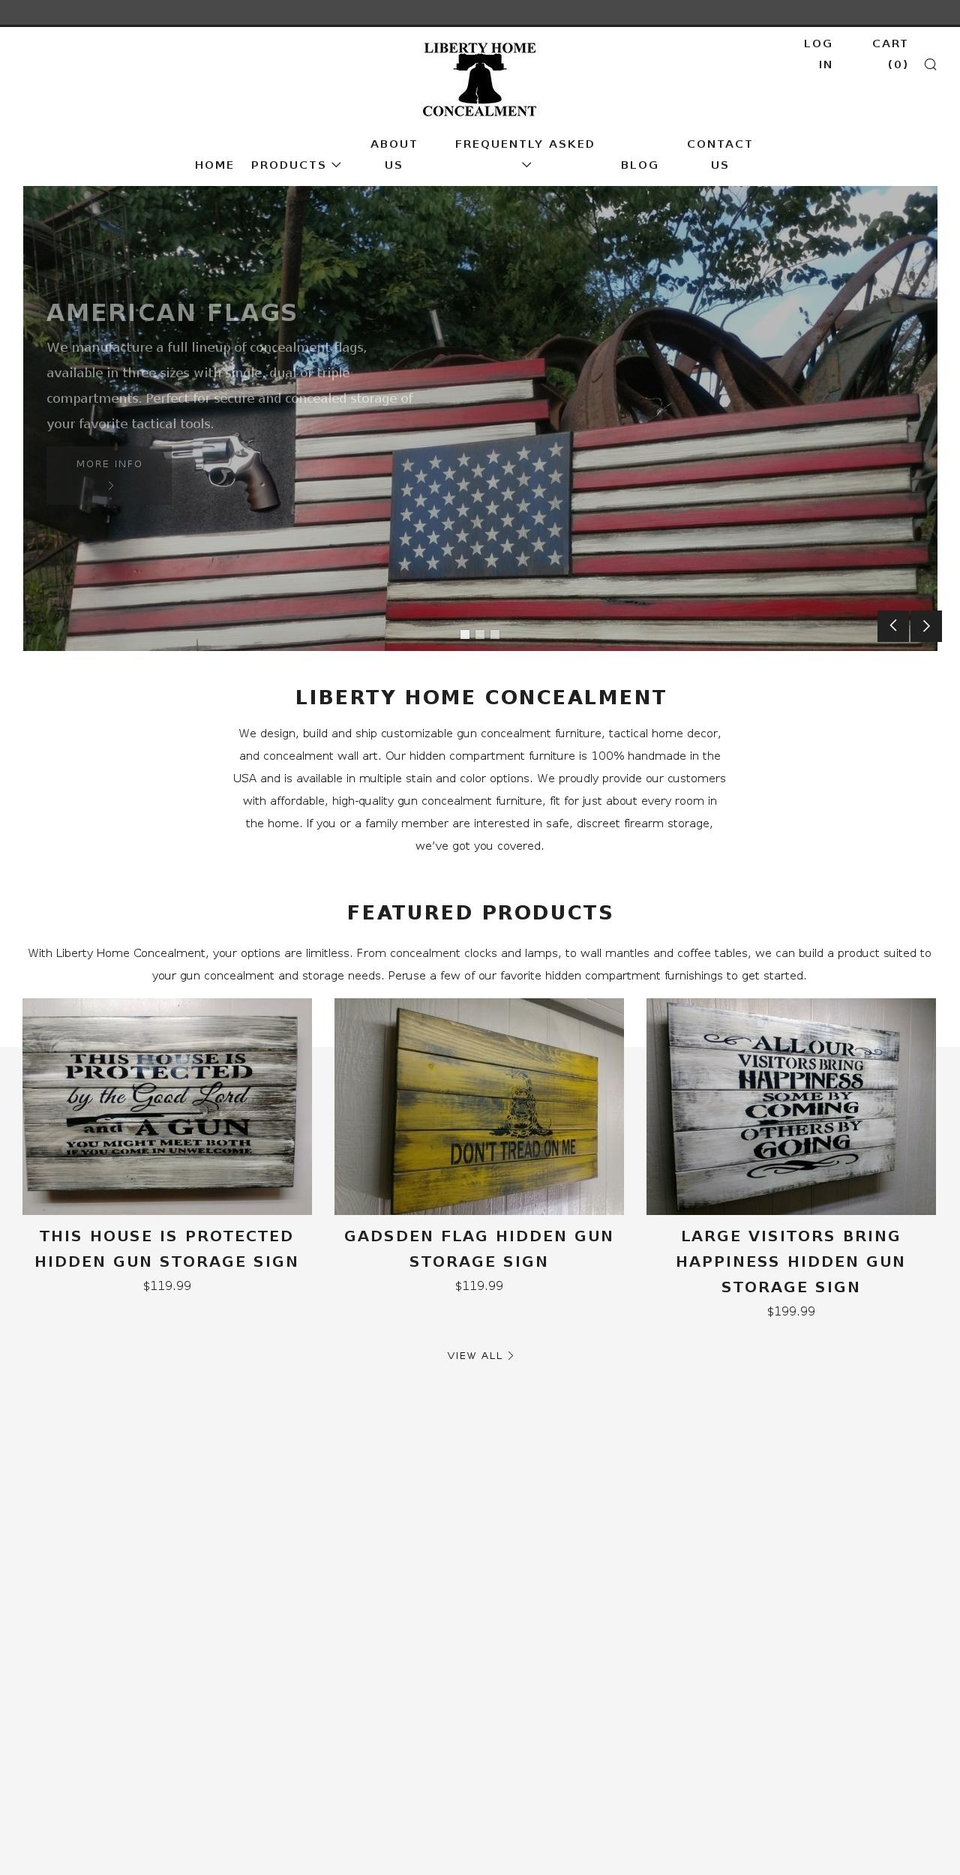 Optimal Shopify theme site example libertyhomeconcealment.com